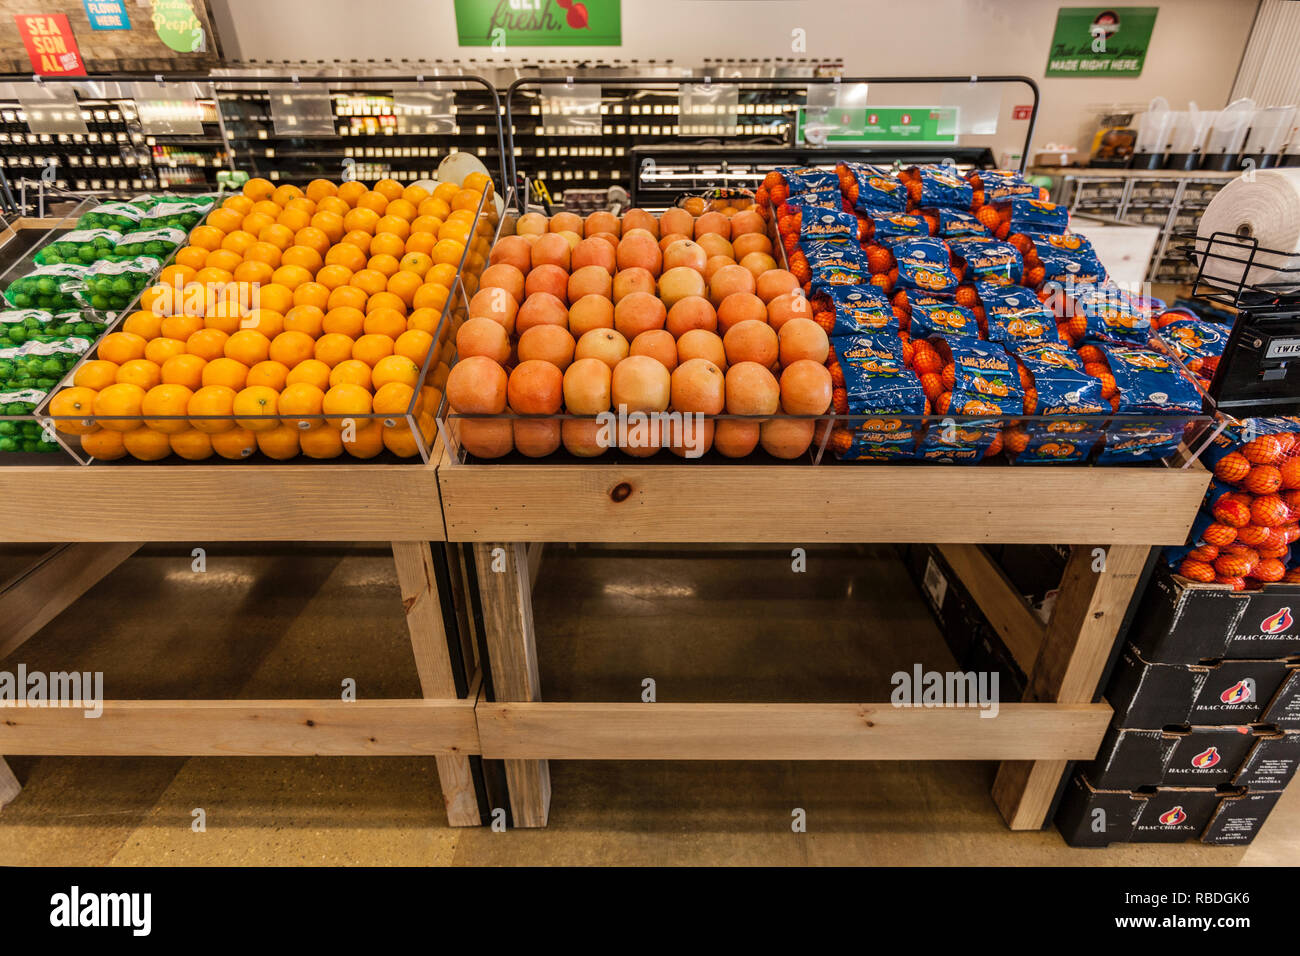 Fruit Stand of Oranges, Grapefruit, Limes At Market Stock Photo